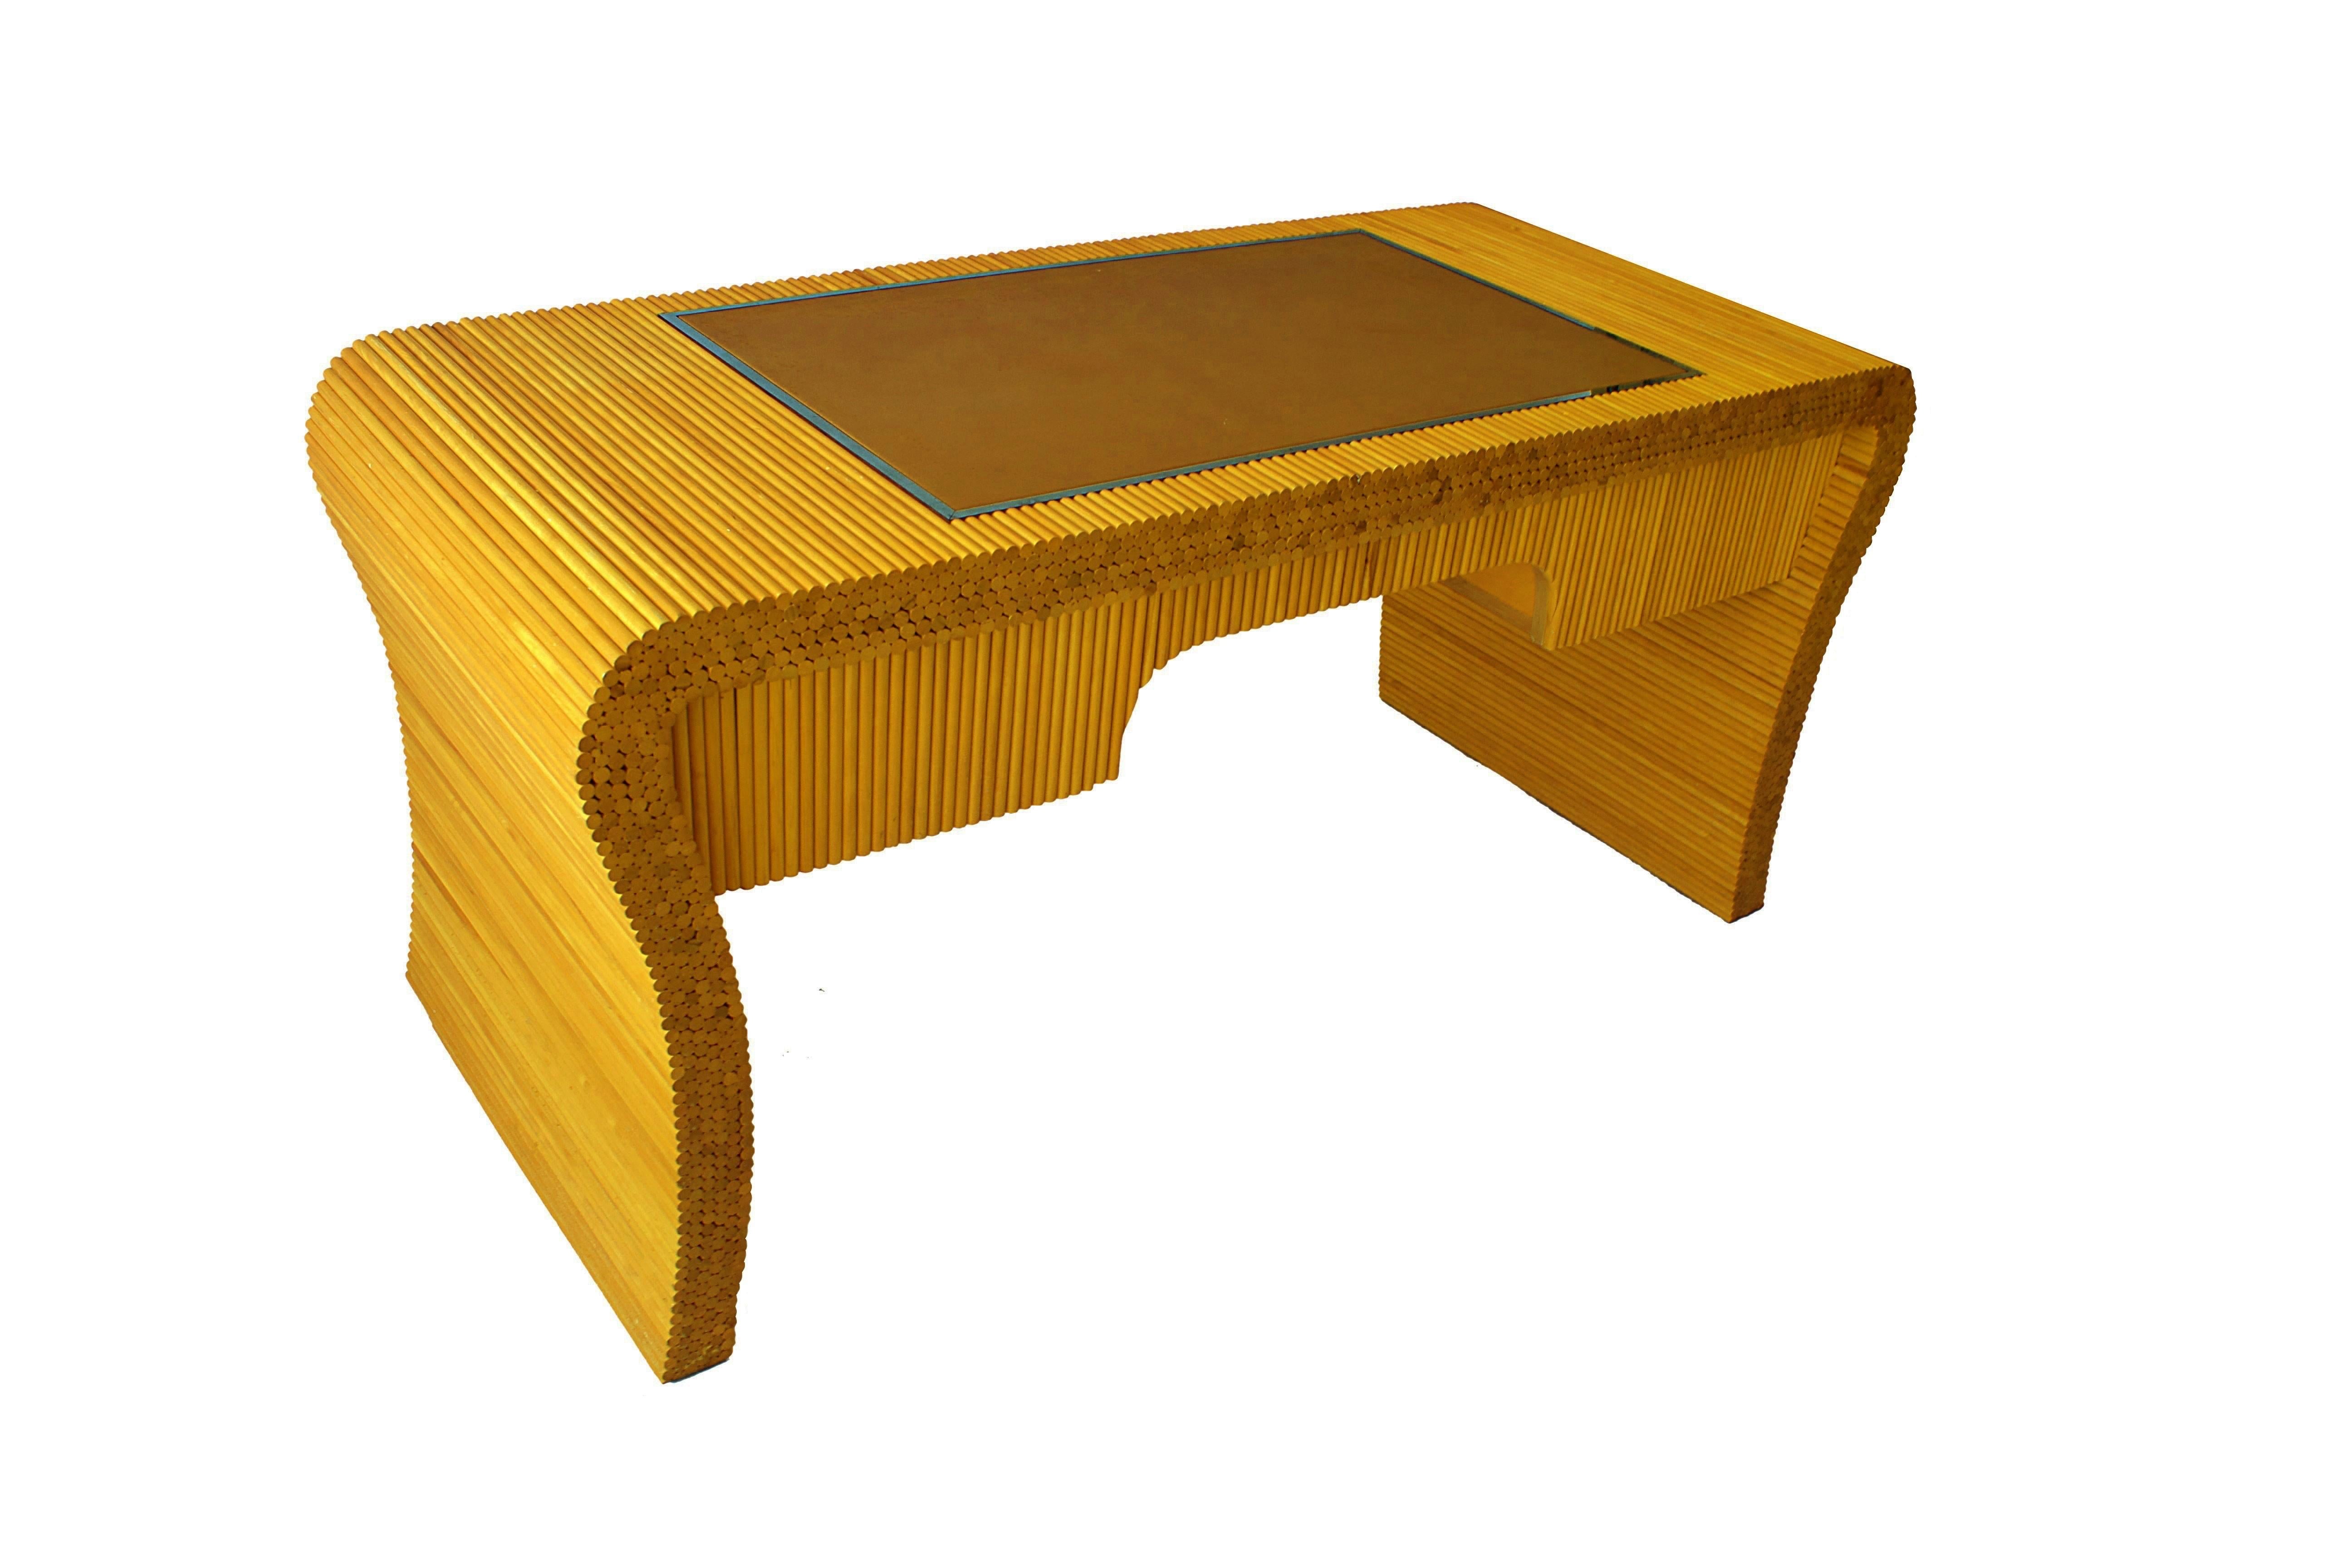 Late 20th Century Unusual American Modern Bamboo, Leather, and Chrome Banded Desk, Ernest Masi For Sale